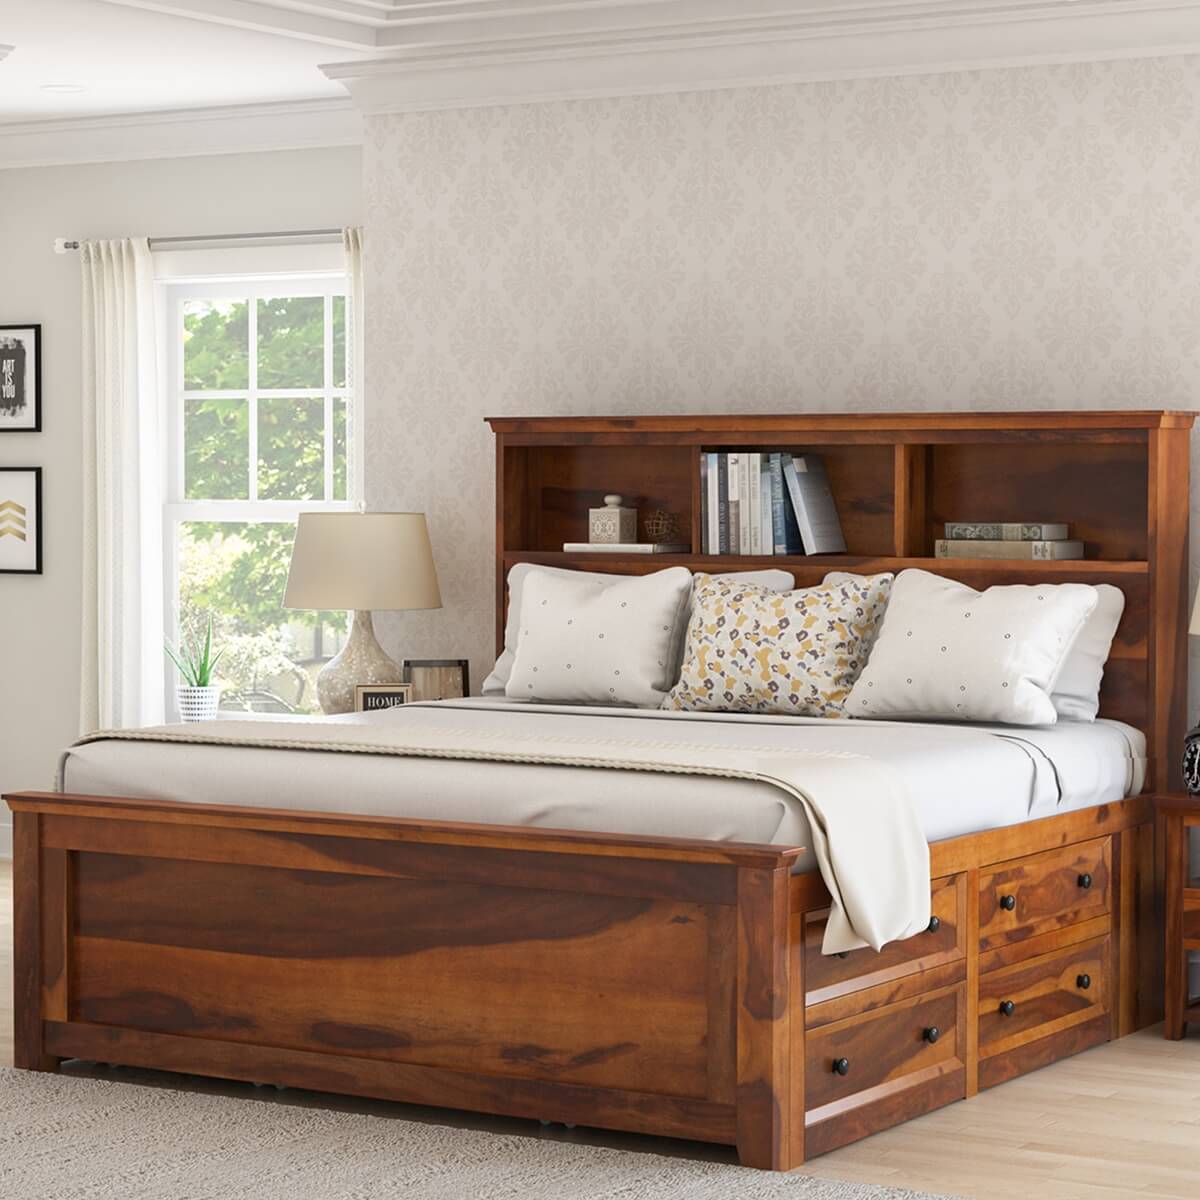 How to Care for and Maintain Your Wooden Beds?